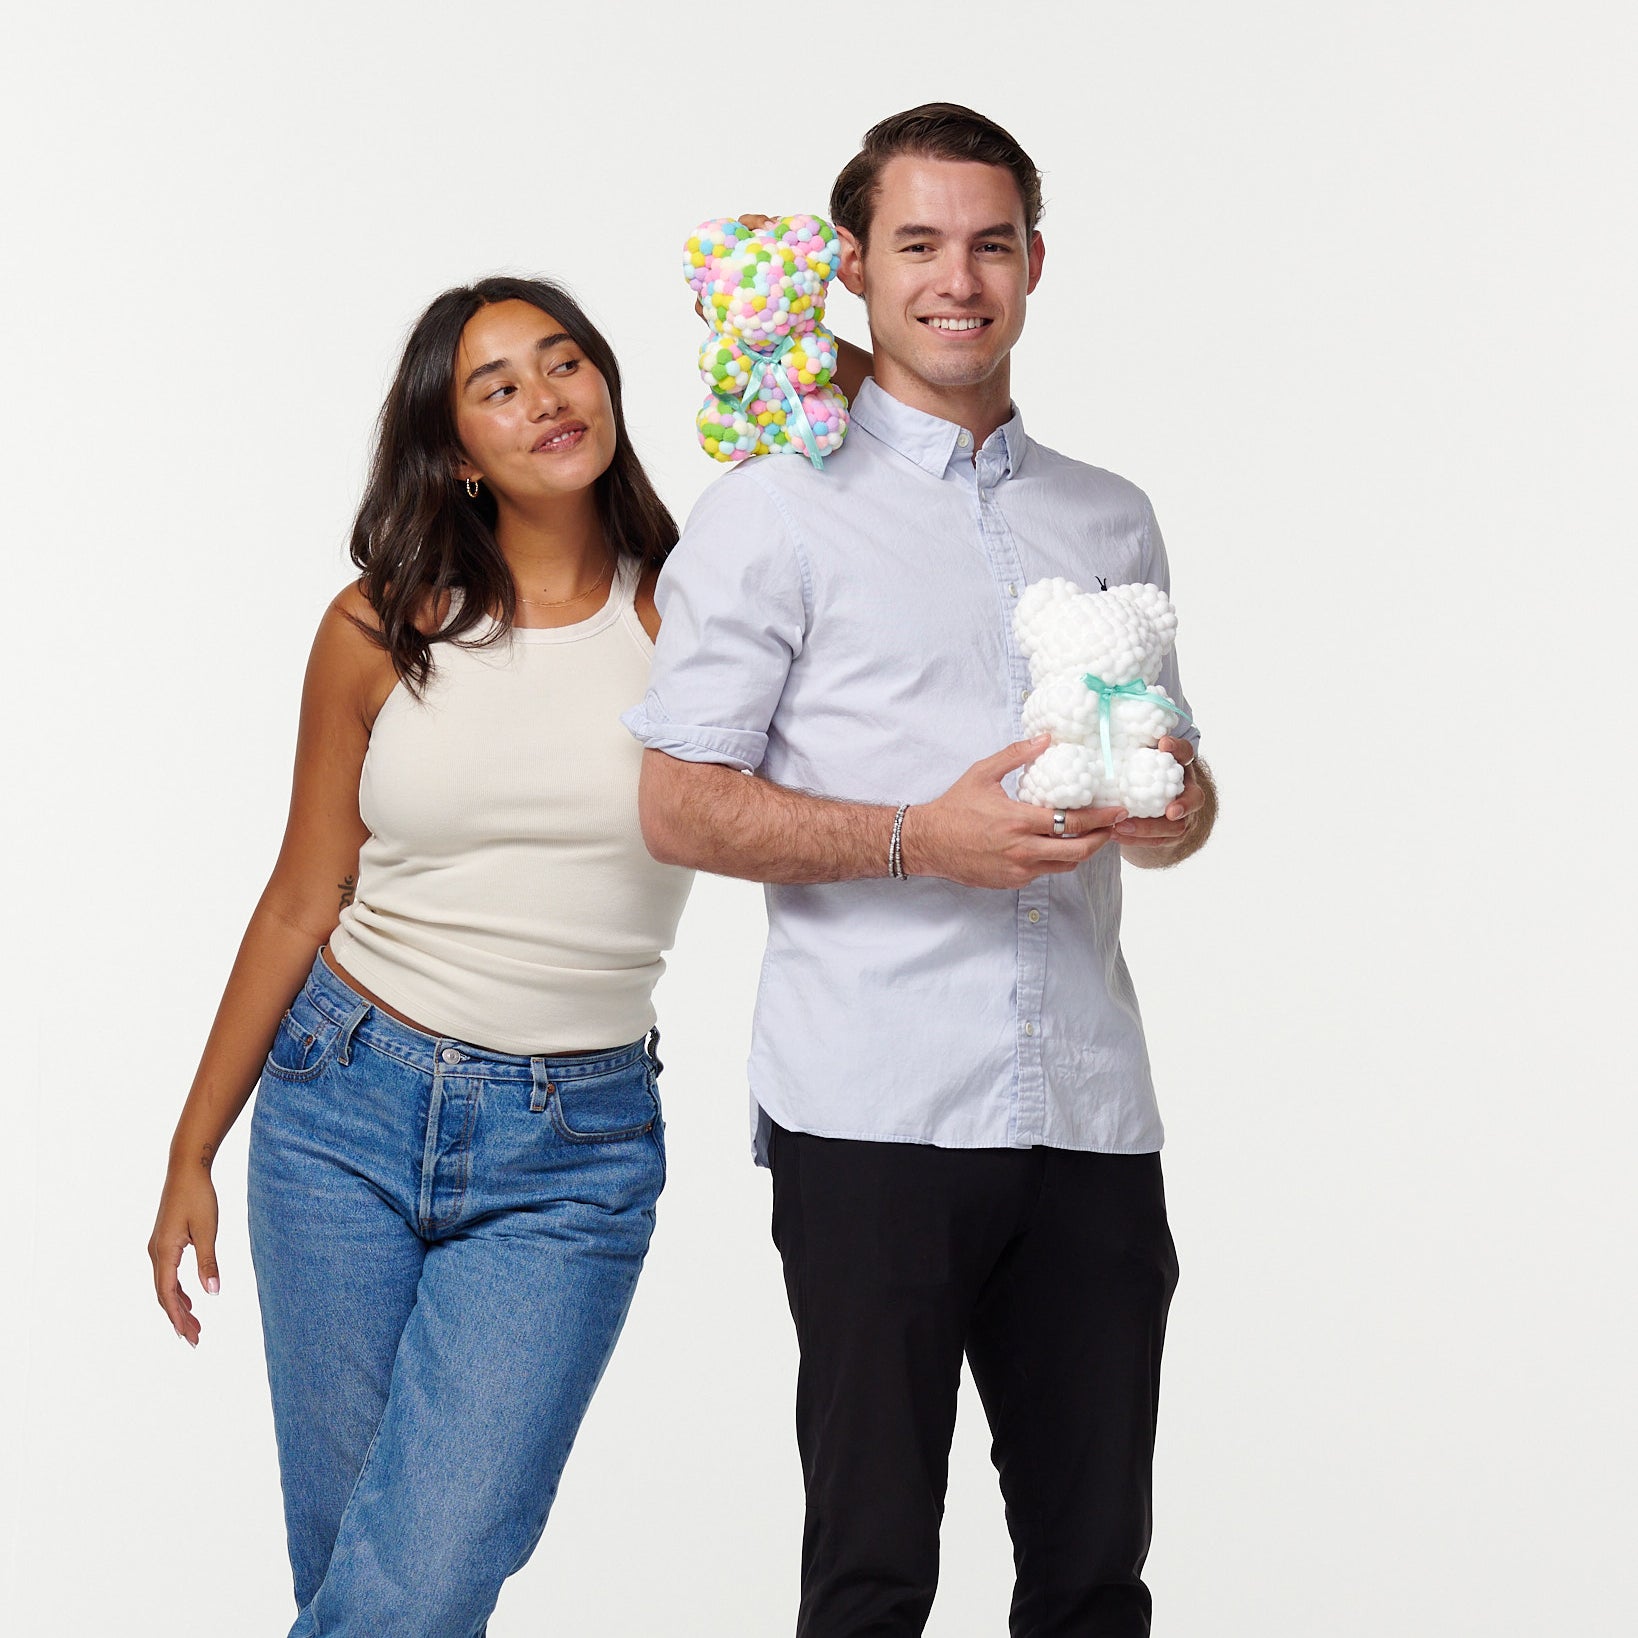 A man and woman stand together smiling; the man holds a white flower bear, and the woman rests her head on his shoulder, holding a colorful flower bear behind his head. They're casually dressed, the man in a buttoned shirt and slacks, and the woman in a tank top and jeans.